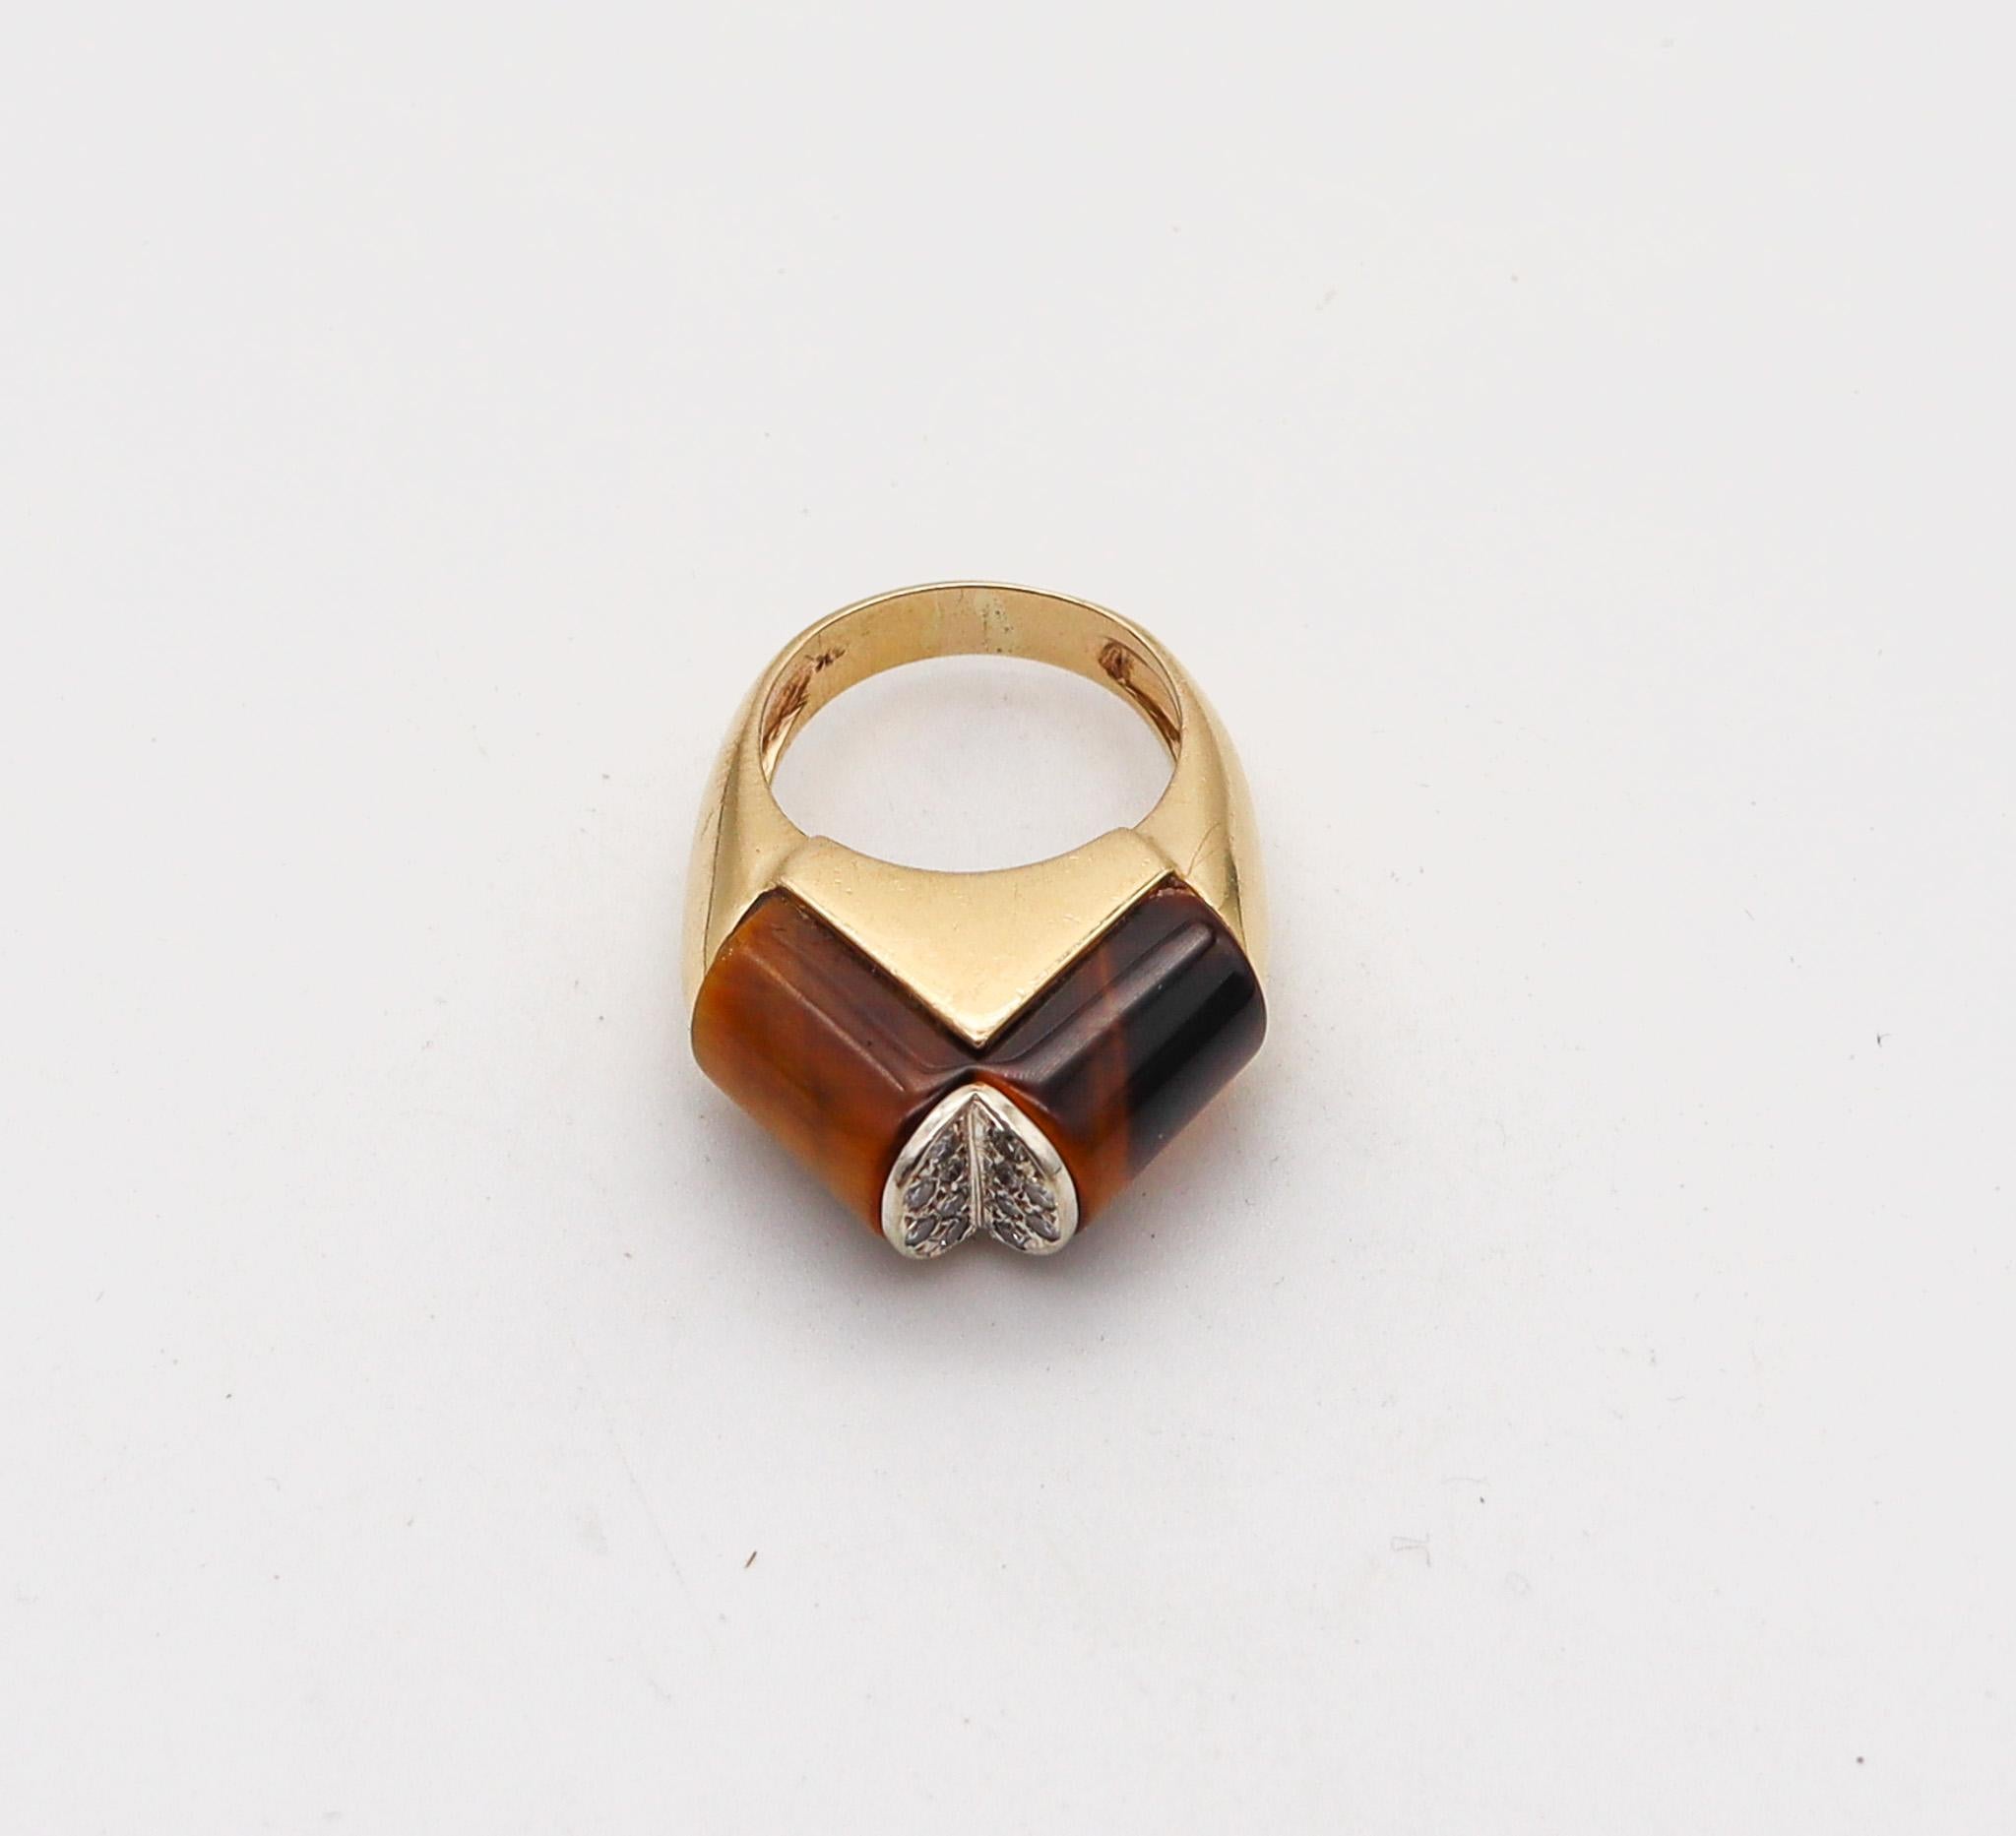 Mixed Cut Modernist 1960 Sculptural Geometric Ring In 14Kt Gold With Diamonds & Tiger Eye For Sale